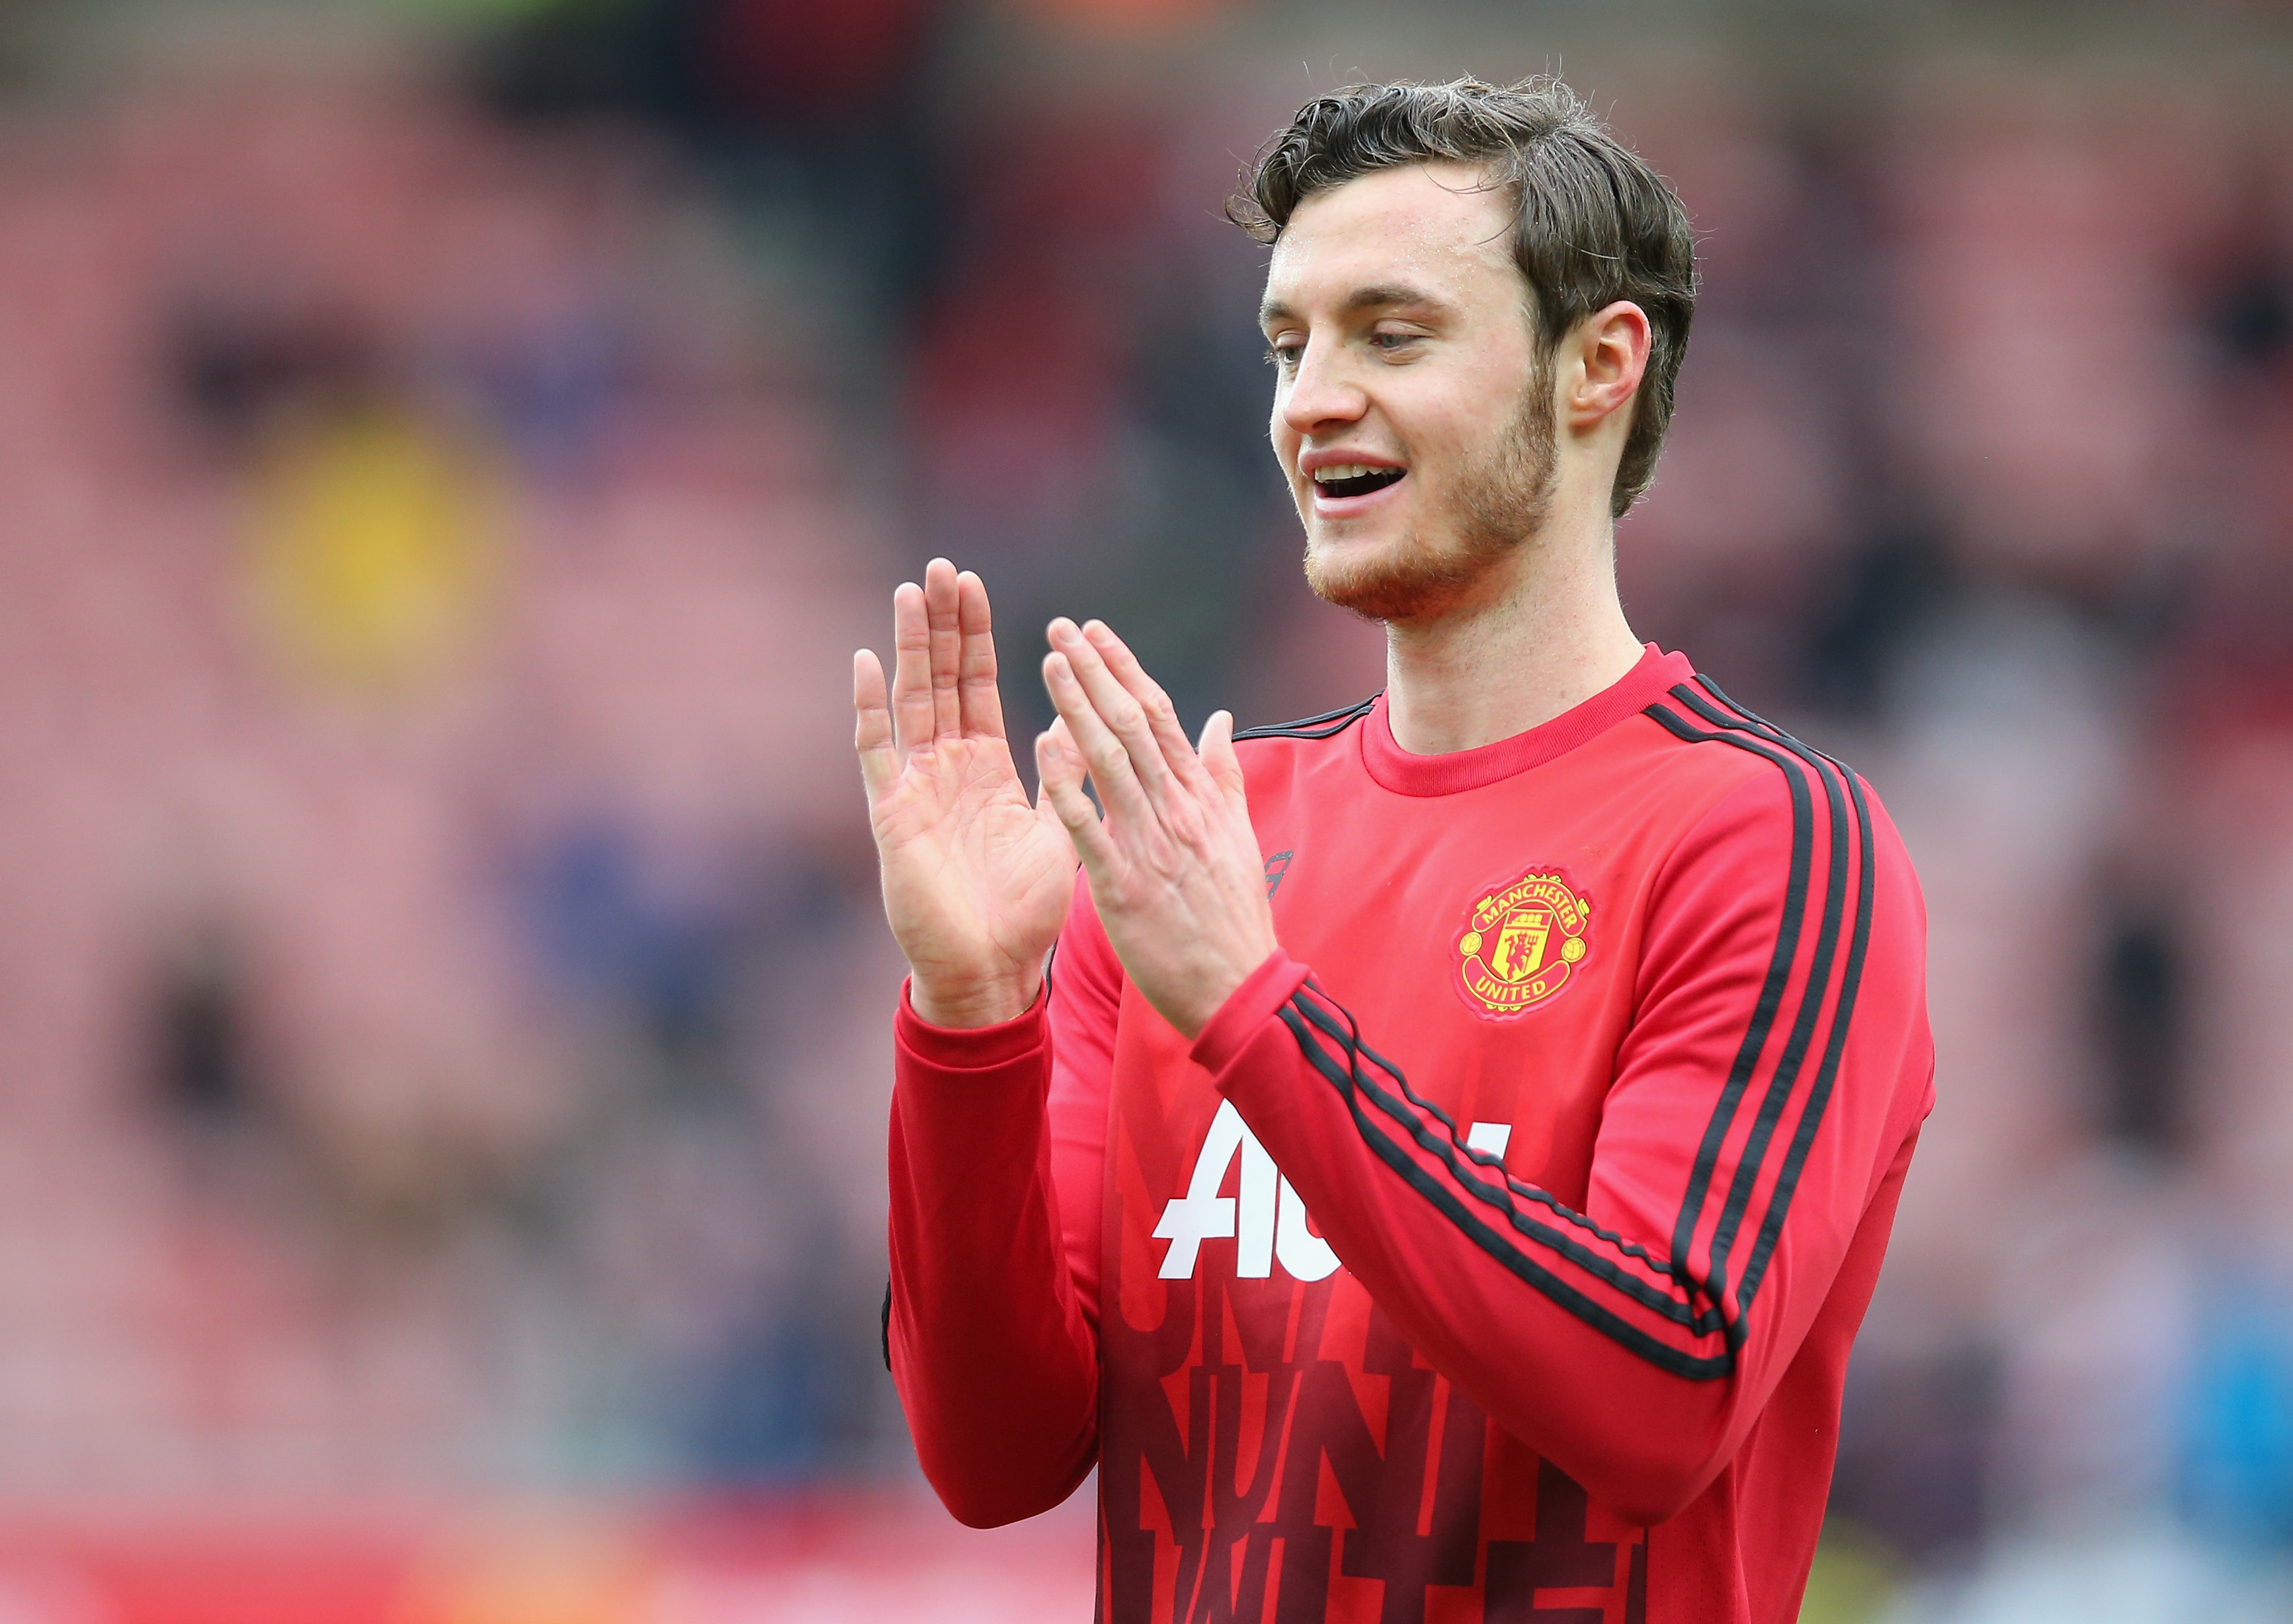 SUNDERLAND, ENGLAND - FEBRUARY 13: Will Keane of Manchester United is seen during the warm up prior to the Barclays Premier League match between Sunderland and Manchester United at the Stadium of Light on February 13, 2016 in Sunderland, England.  (Photo by Ian MacNicol/Getty Images)